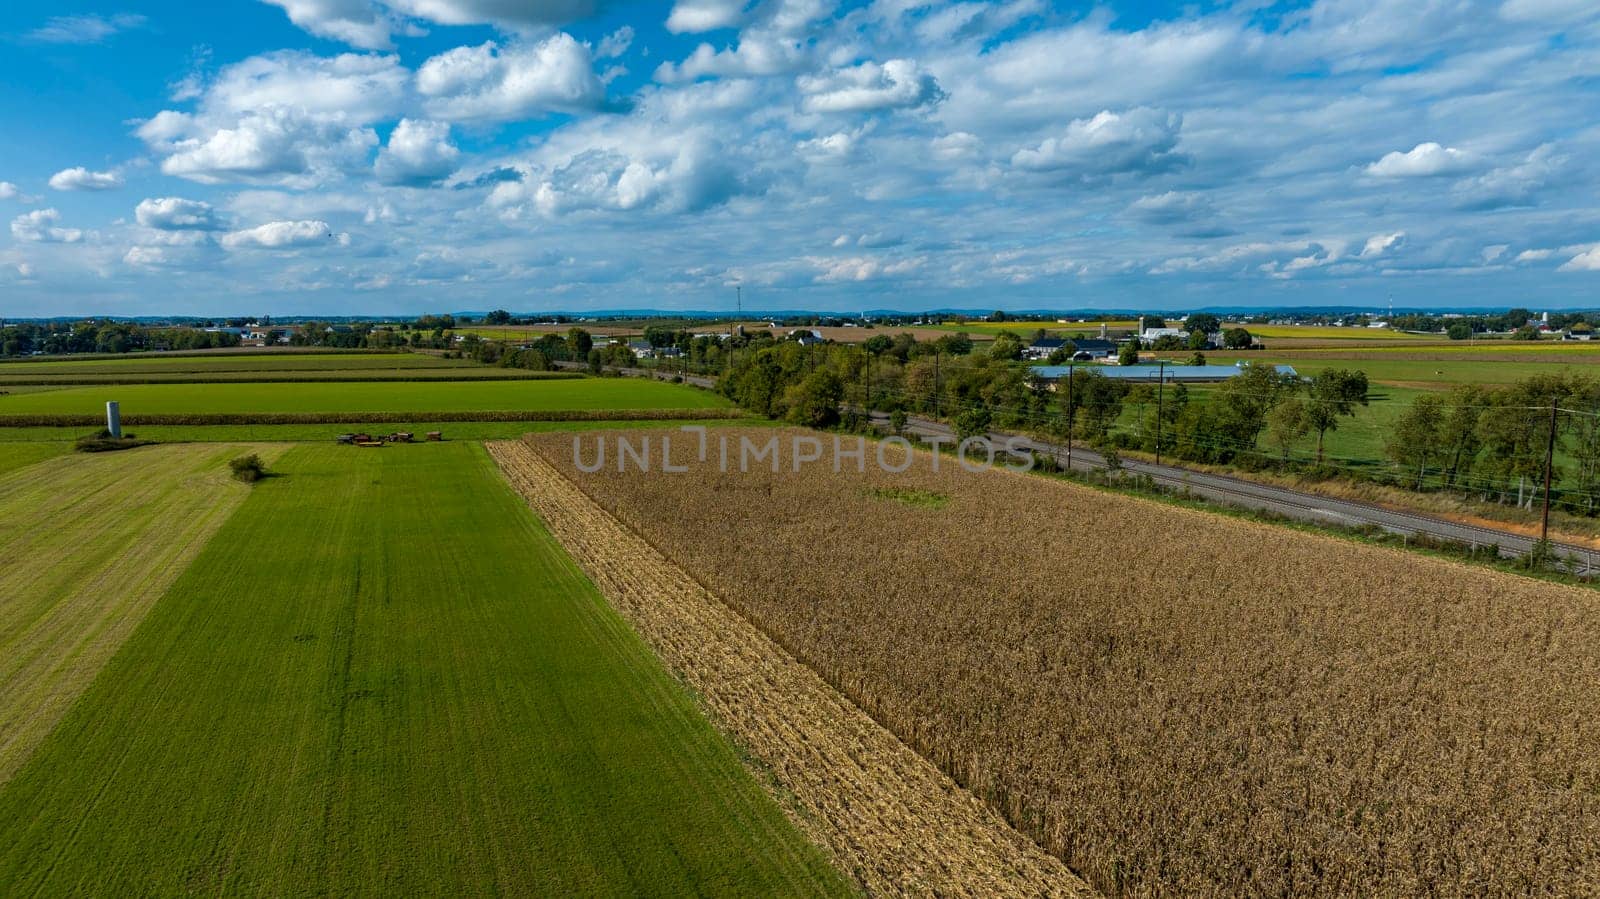 A Cornfield and Green Pastures under Blue Sky with Clouds